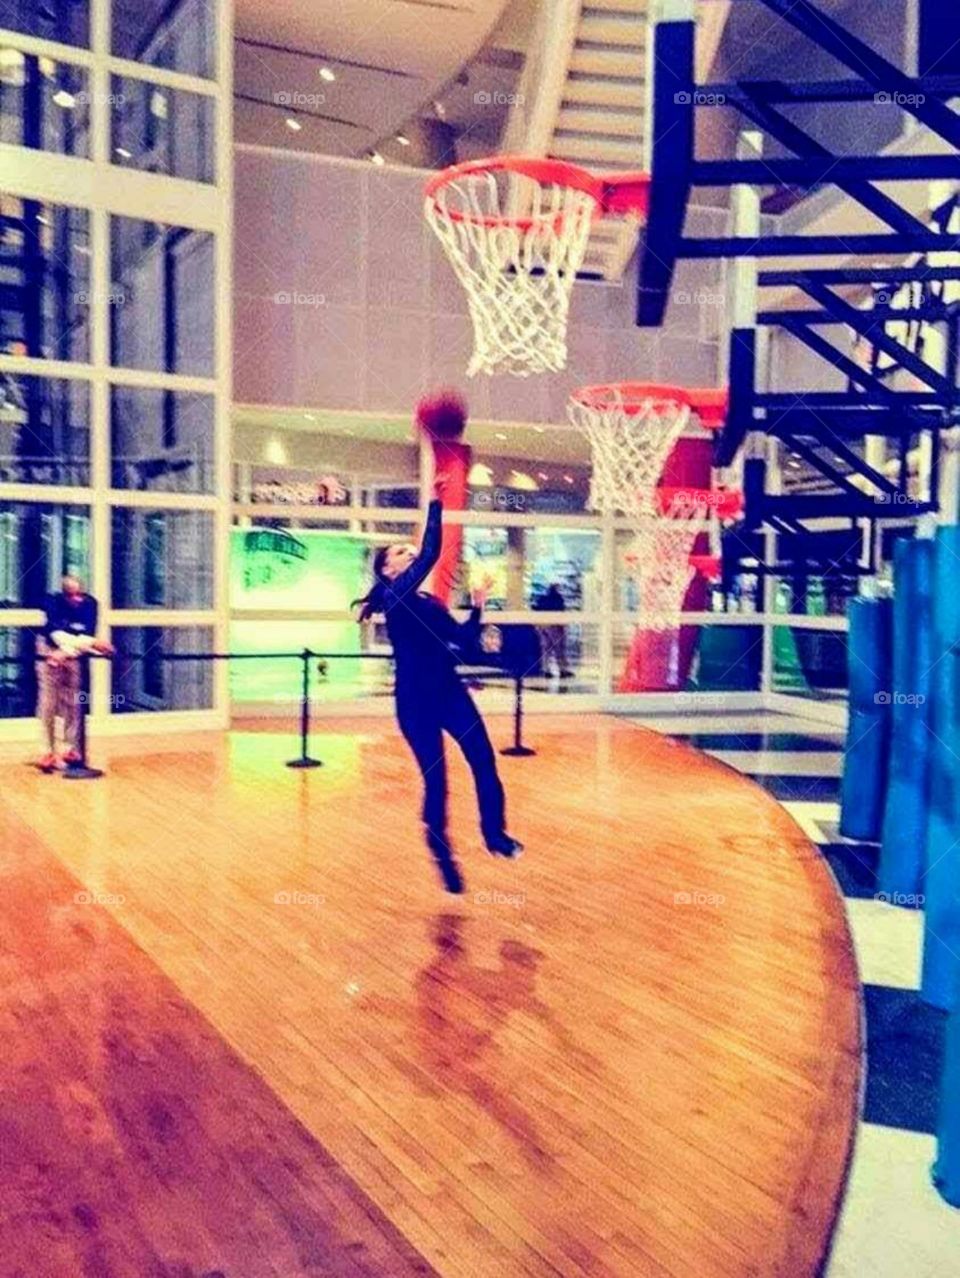 Taking the championship shot like the skilled athlete she is.My daughter going for gold,having fun at the Basketball Hall of Fame in our Hometown of Springfield,Massachusetts